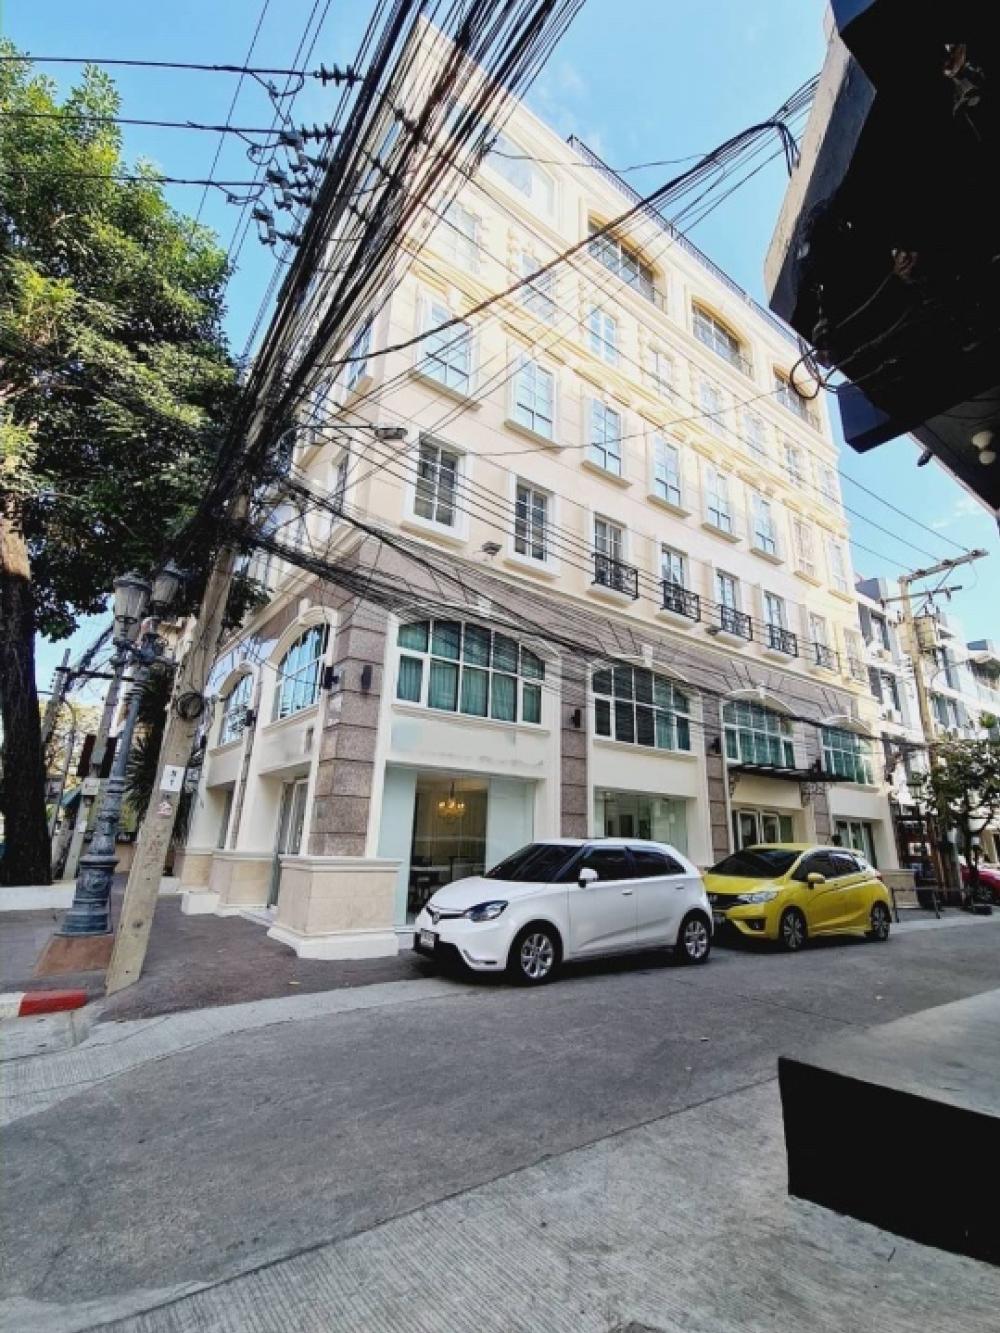 For RentShophouseKasetsart, Ratchayothin : Rental : Stand Alone Buidling in Ratchayothin , 5 Storeys🔥🔥Rental Price : 500,000 THB / Month 🔥🔥 • For Hotle , Spa , Clinic , Lounge • Have Restaurant • Room Type : Standard / Mini / Superrior / Suit / Penhouse • 81 Sqw , 1500 sqm ( 250 m From BTS